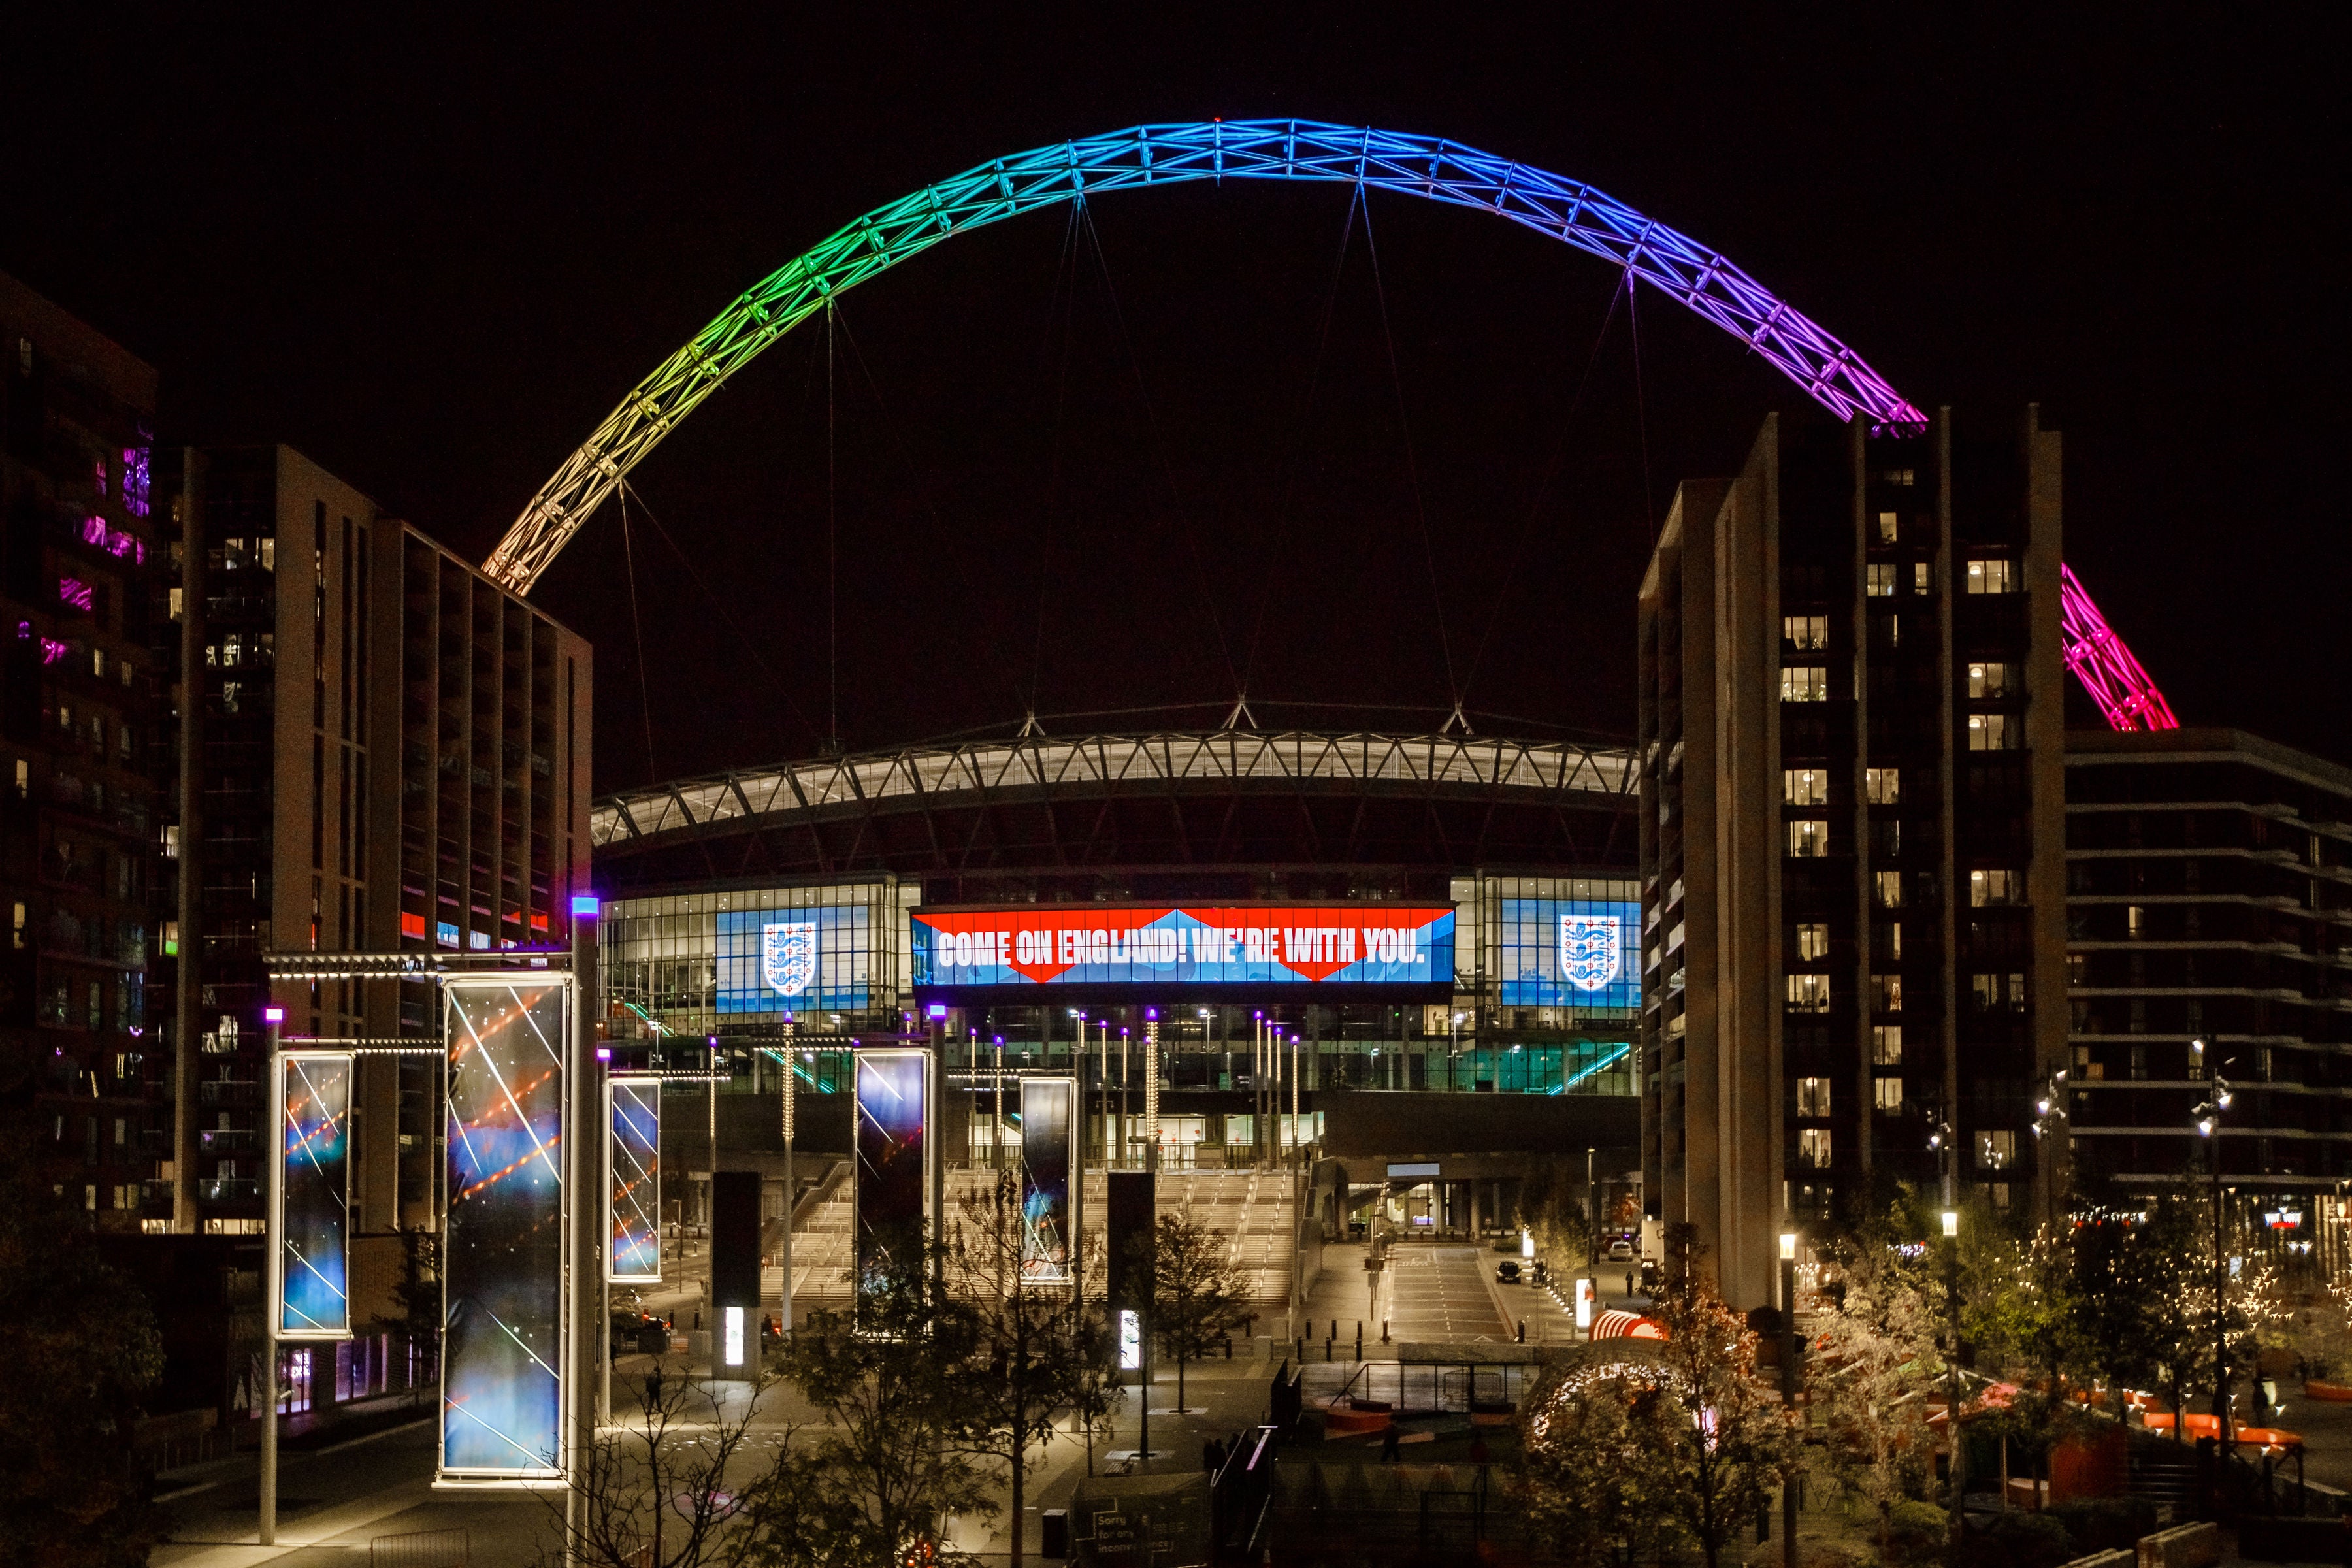 The Wembley arch lit up over the stadium